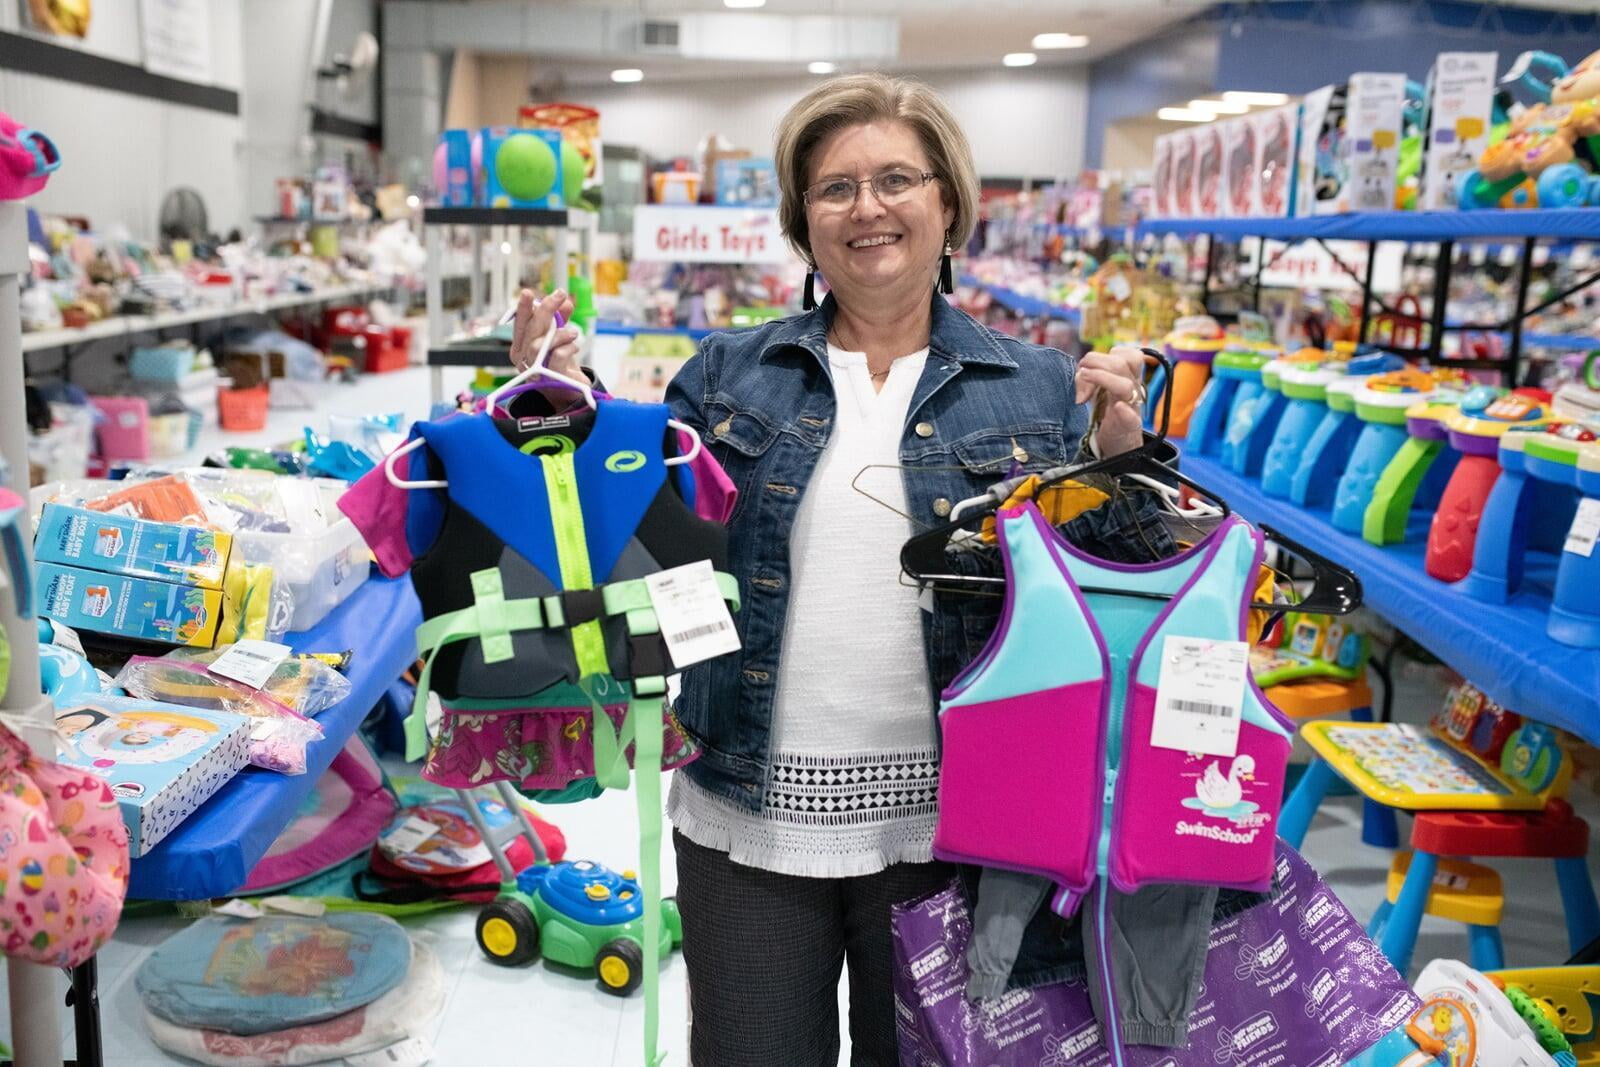 A grandma hold up 2 youth life jackets she finds while shopping JBF!